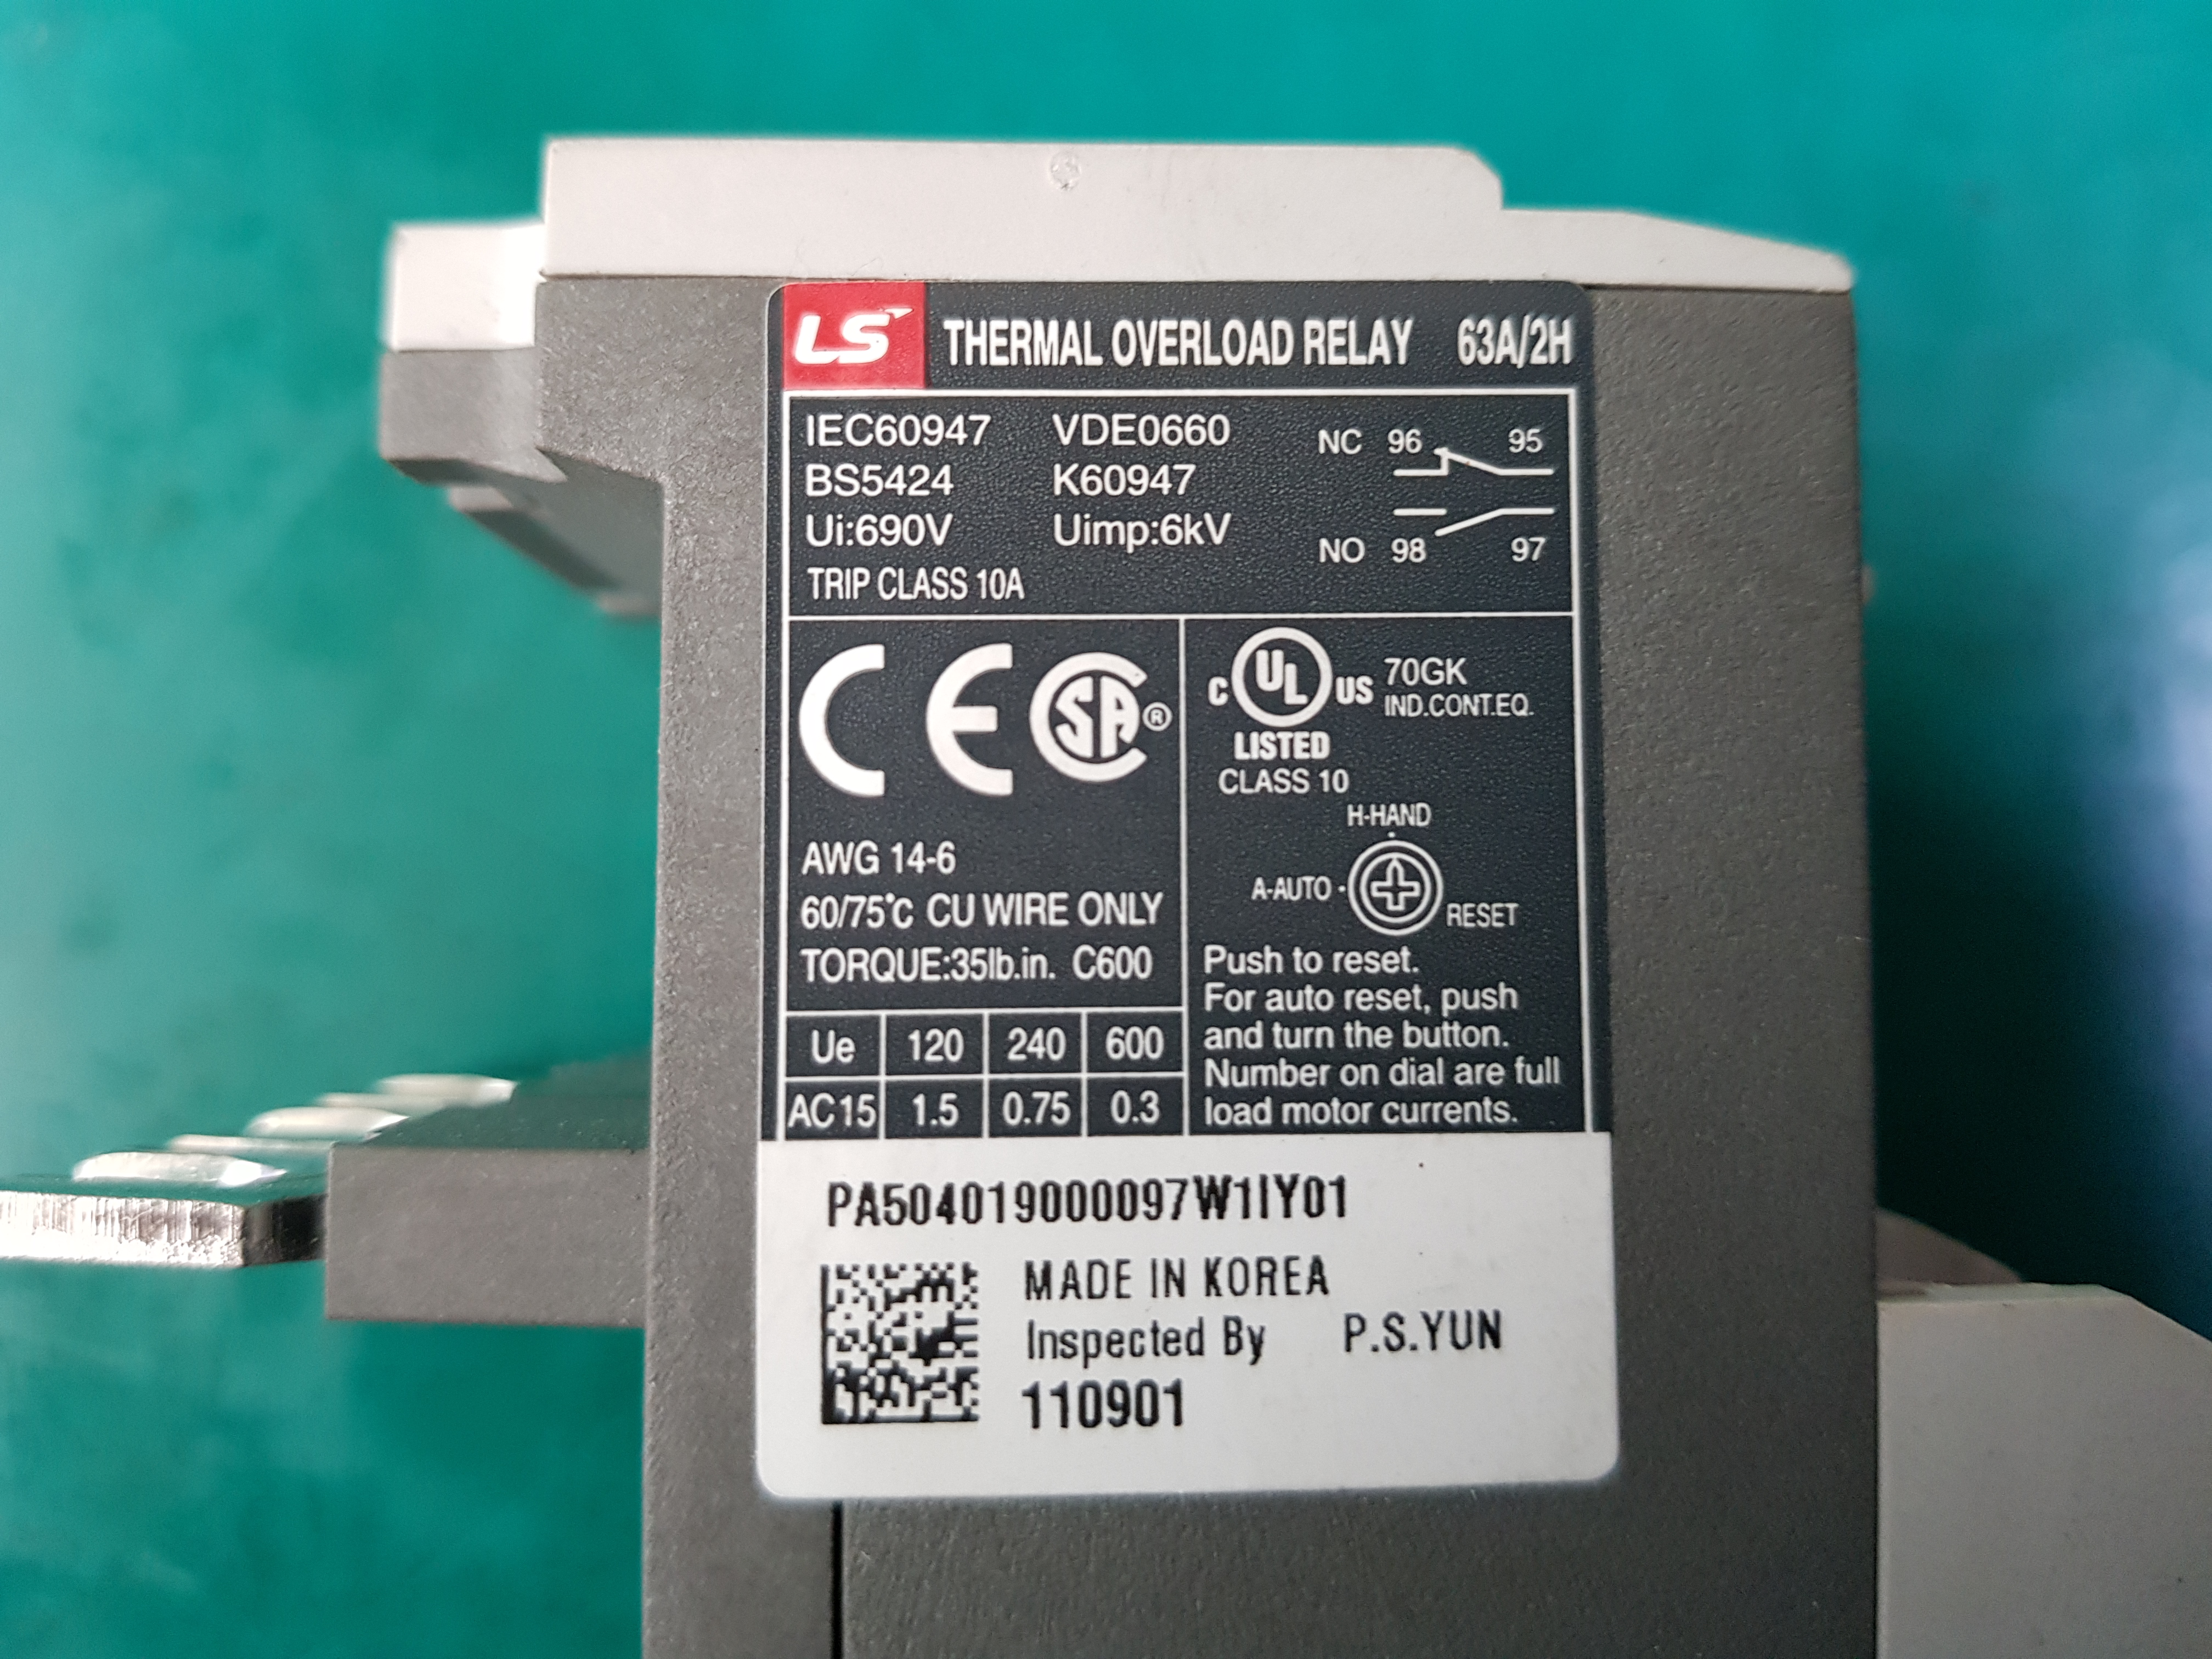 THERMAL OVERLOAD RELAY MT-63(중고)